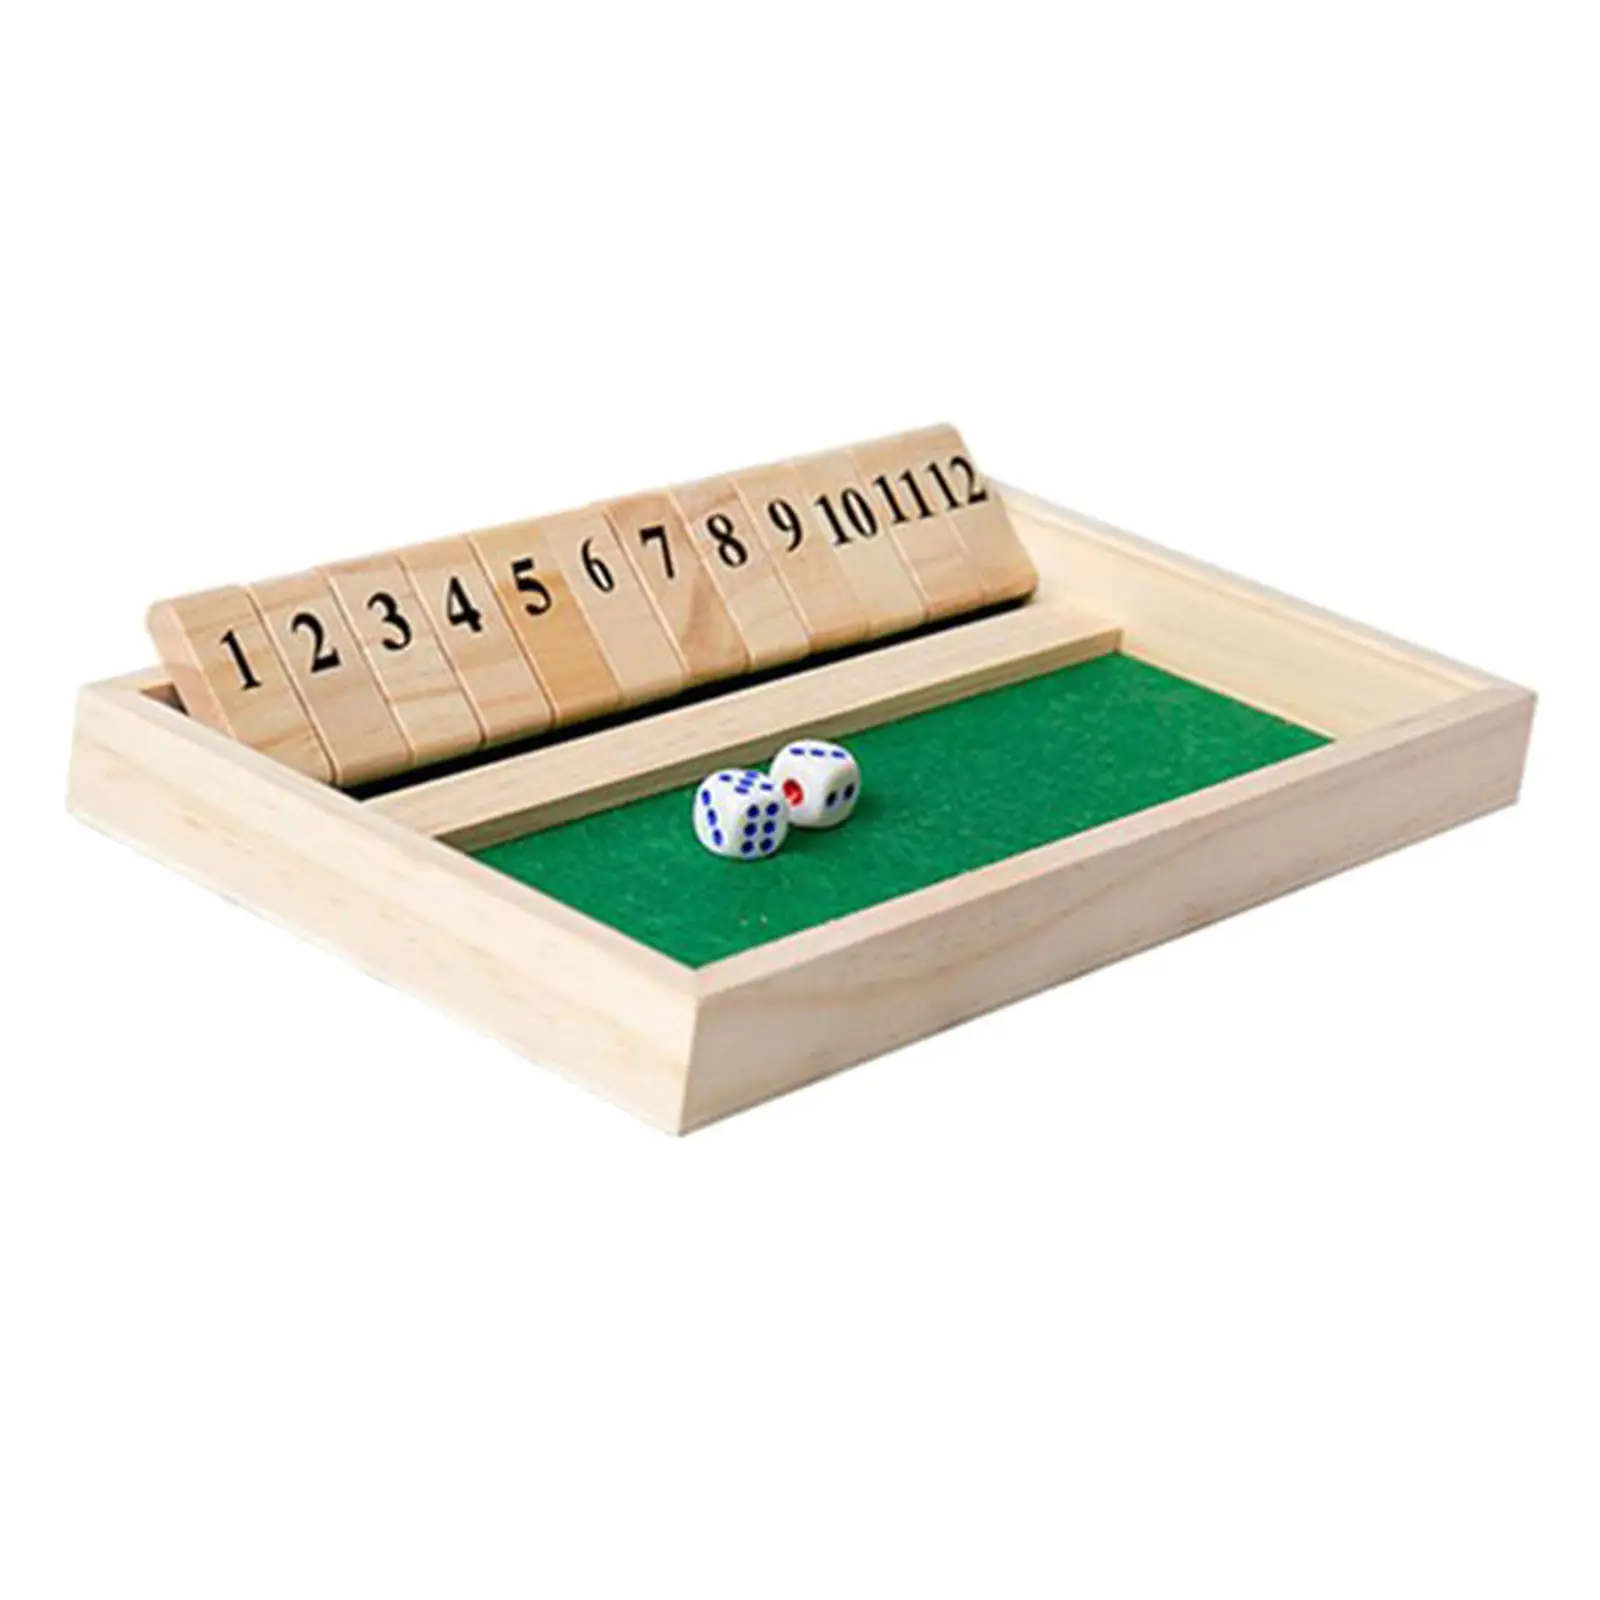 Shut The Box Wooden Board Dice Game with 12 Numbers  Tabletop Traditional Games Indoor Play Fun Game Entertainment